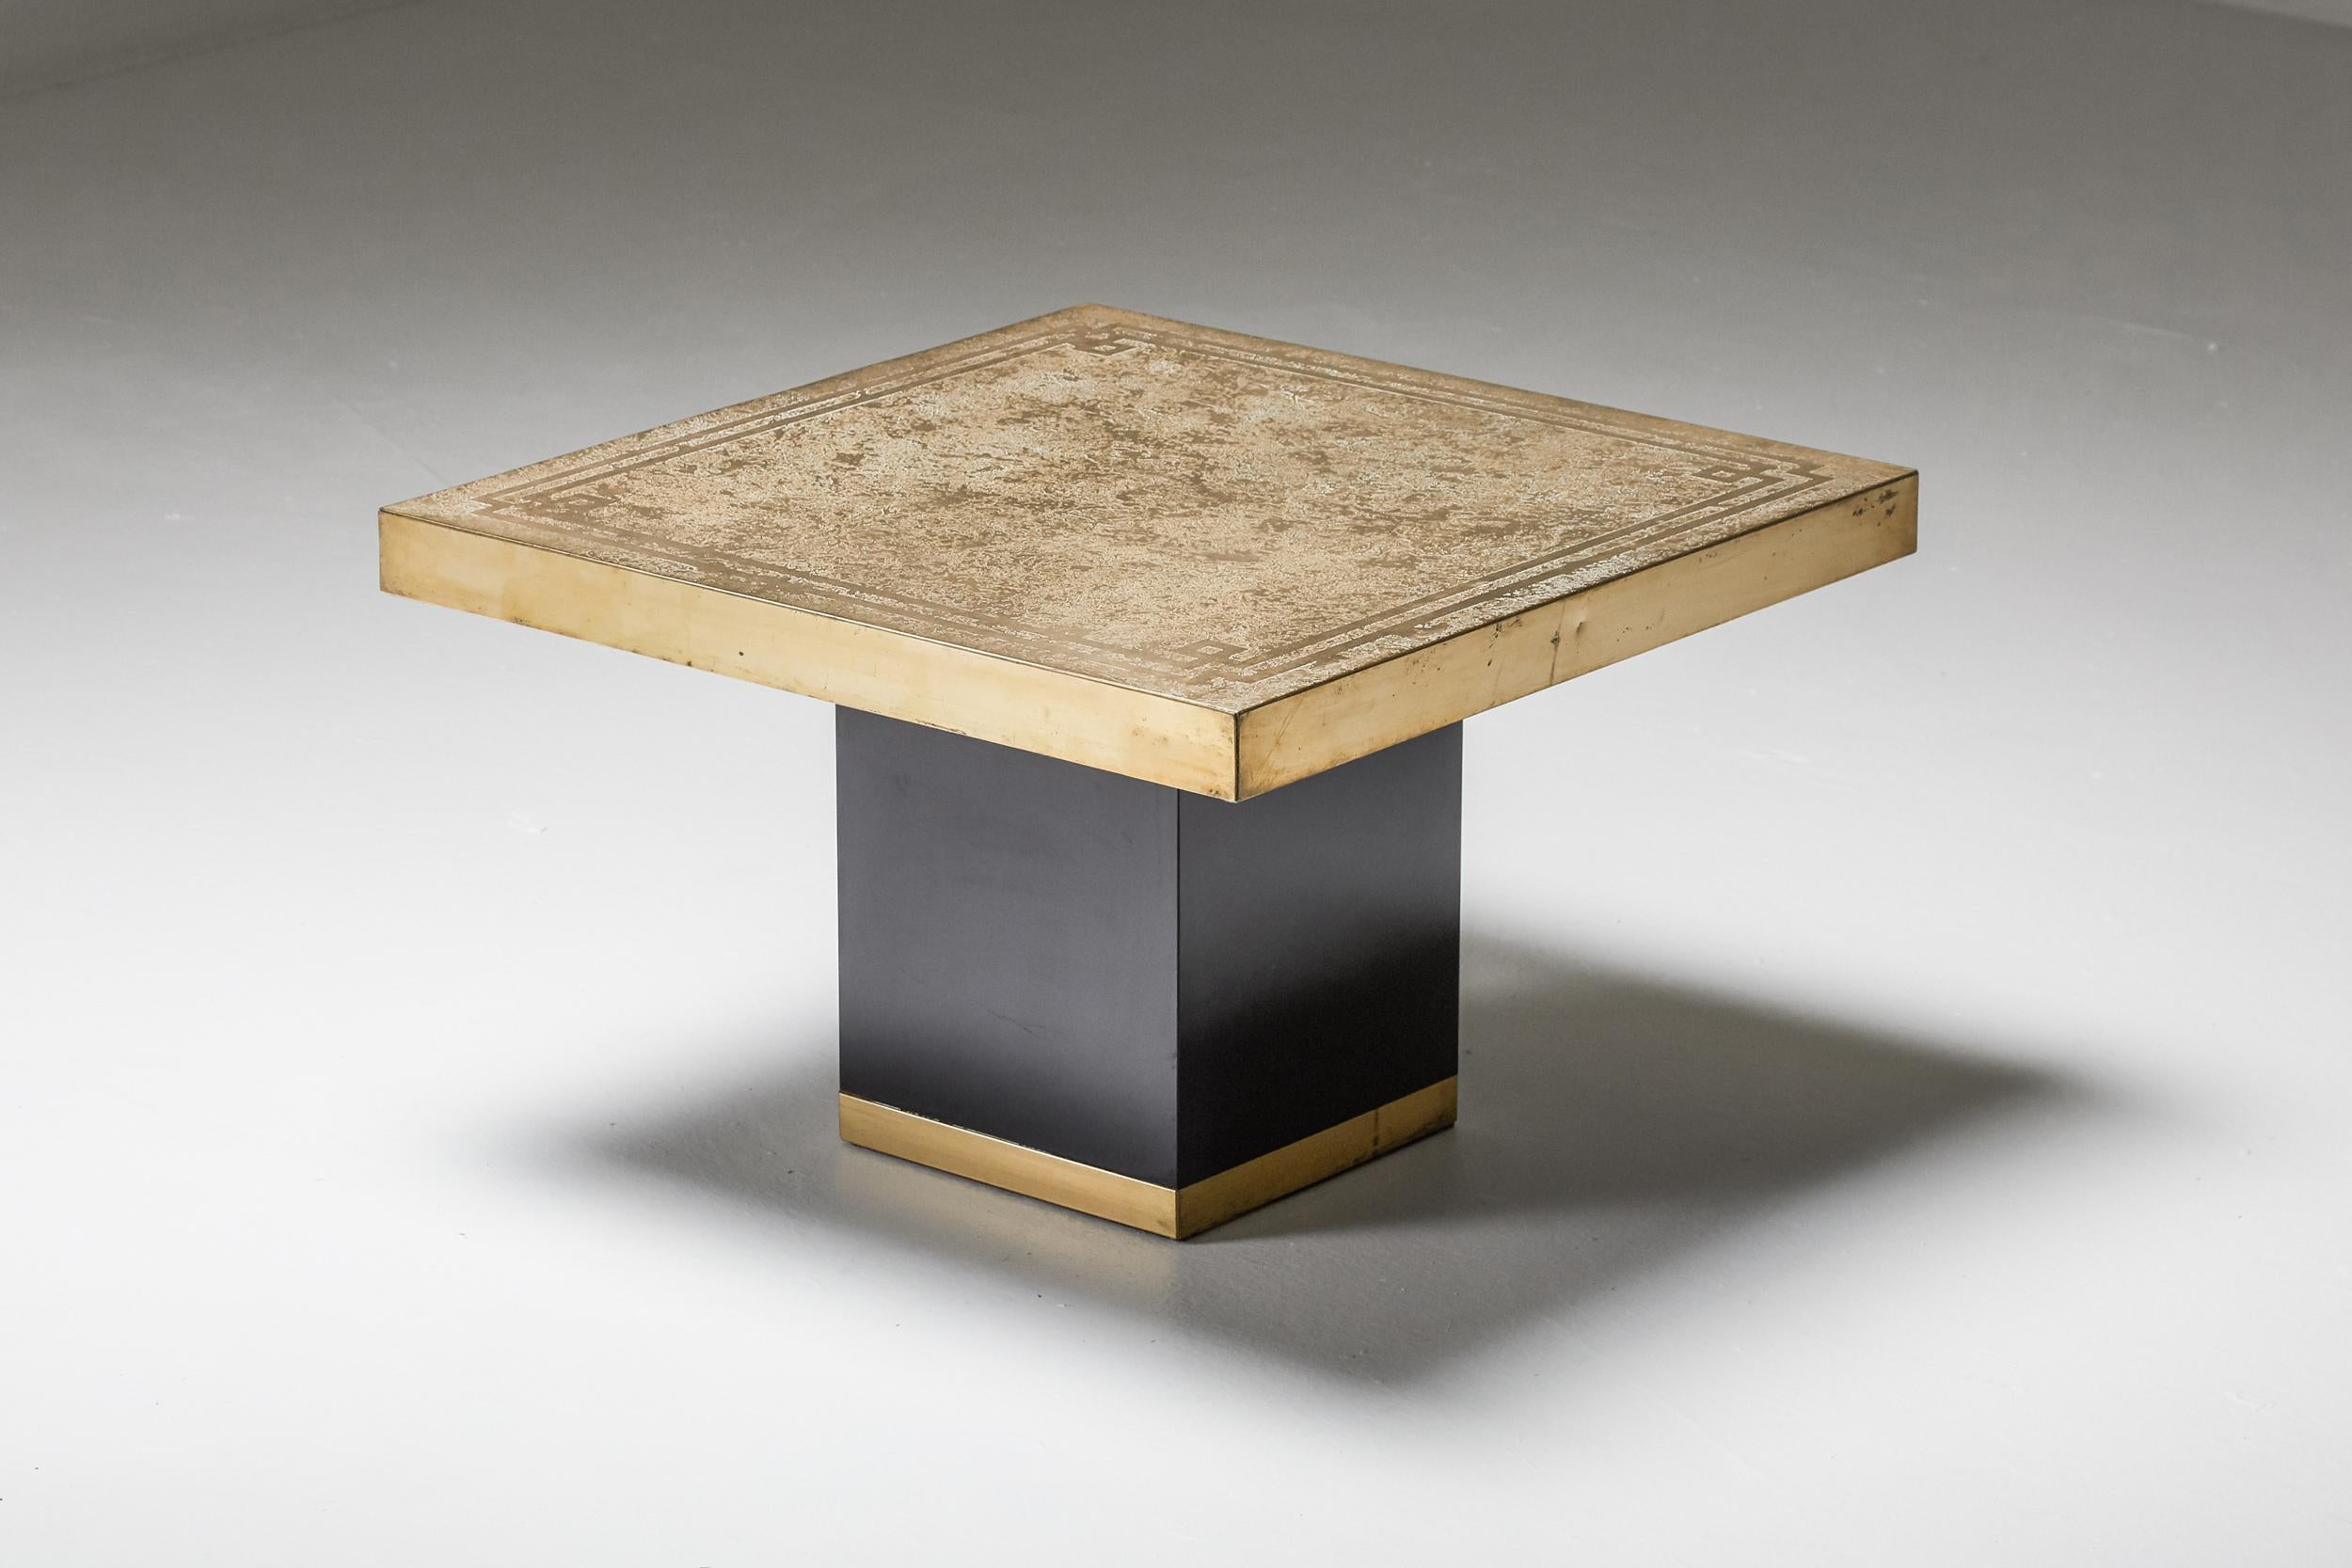 Brass Etched; Hollywood Regency; Side Table; Italy; 1950s; Mid Century Modern; Italian Design; Italy; Coffee Table;

This design reflects an elegant combination of an etched brass top with a black shiny base. The square top rests on the rectangular